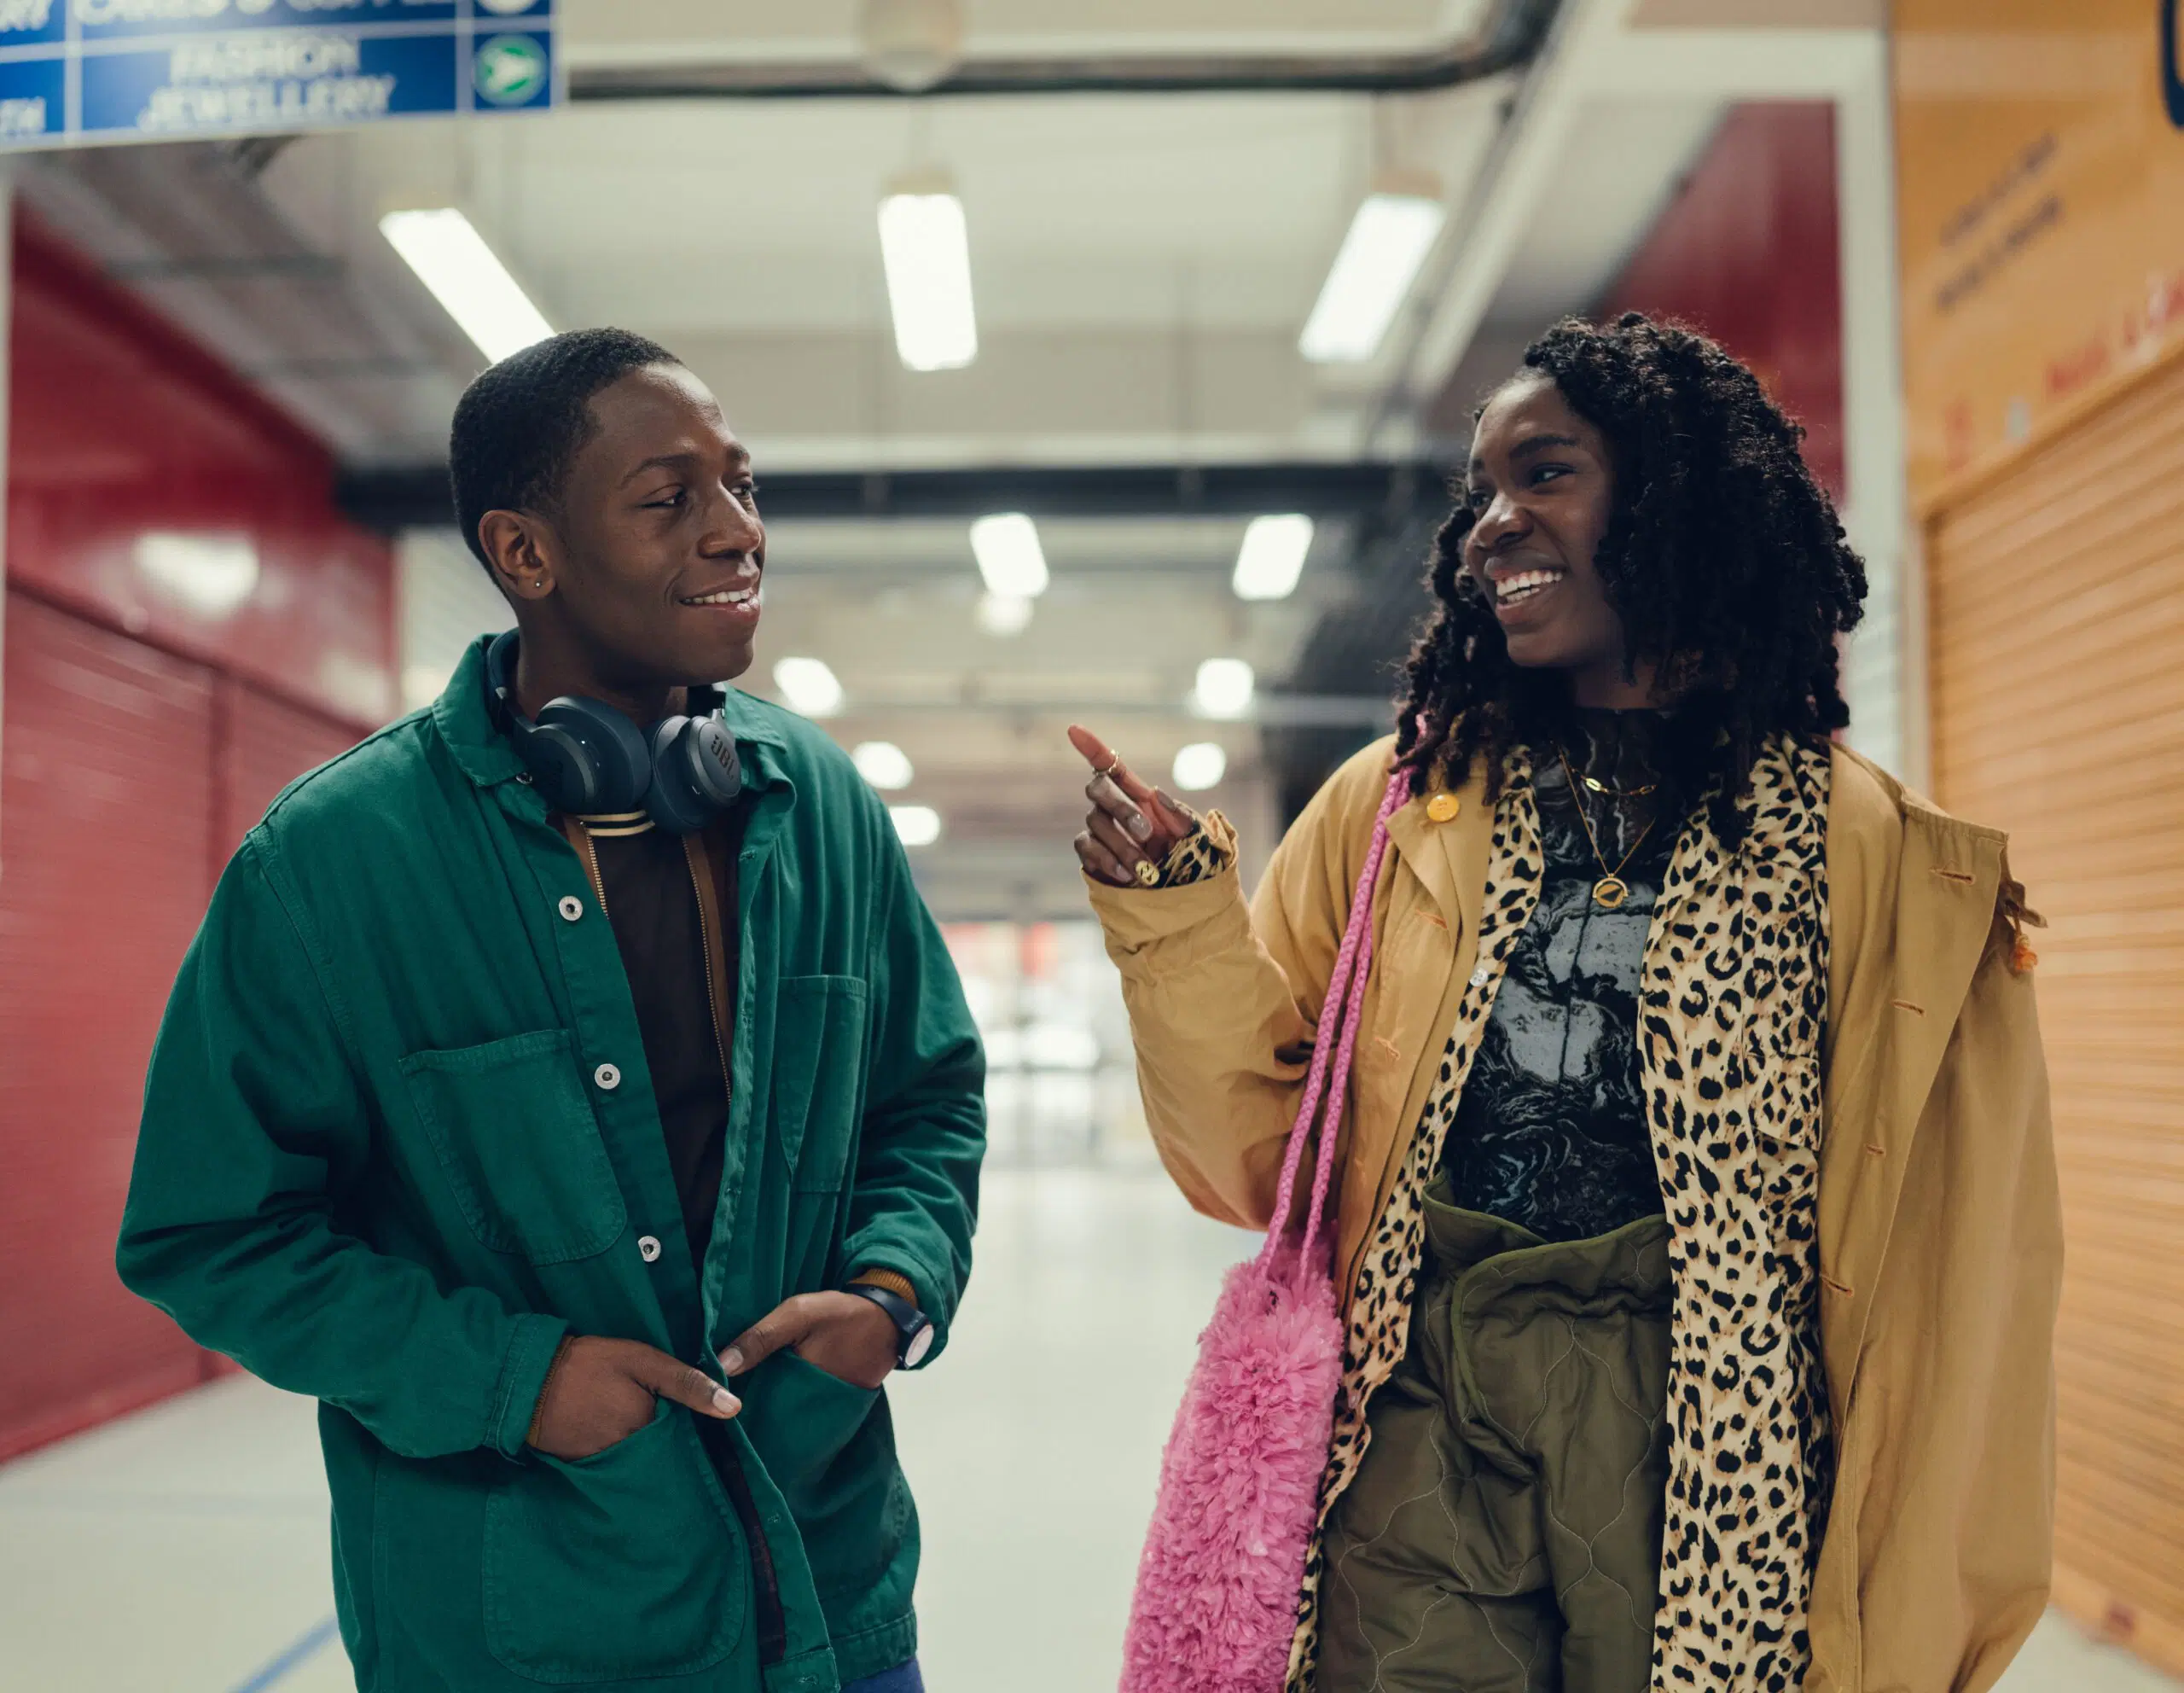 ‘Rye Lane’ Captures Young Black Love In A Hilarious And Heartwarming Way – Sundance 2023 Review 